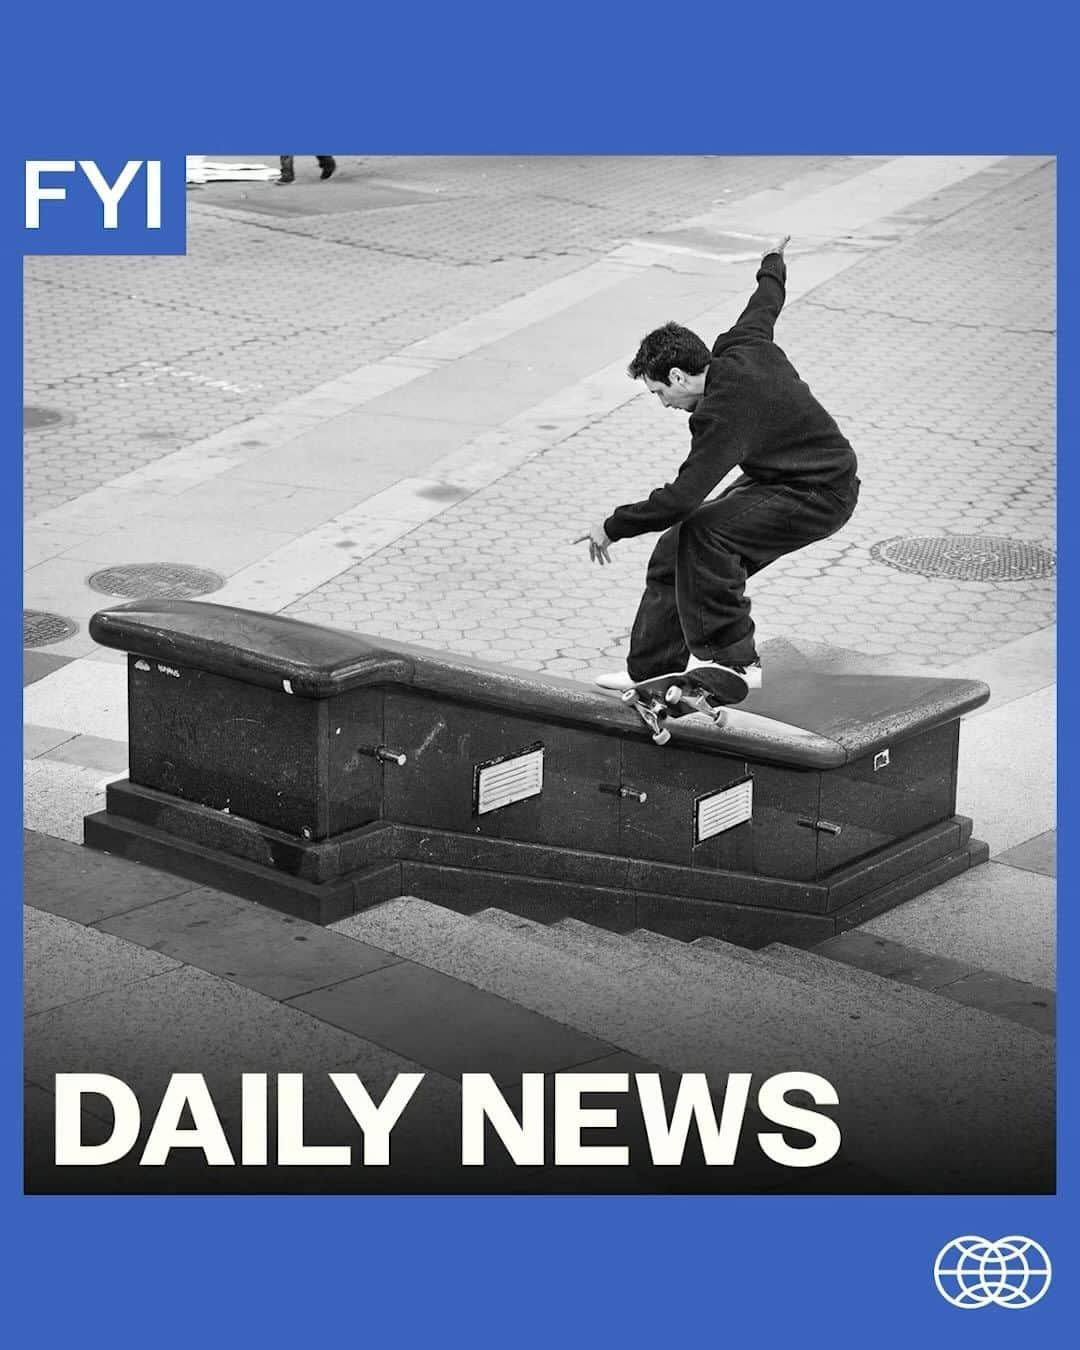 The Berricsのインスタグラム：「Daily News:   @bodelazzi just dropped his newest part for @venturetrucks on @freeskatemag filmed and edited by the one and only @pekkaaa !! Whether he’s skating switch or regular, Bodelazzi effortlessly skates the crustiest spots, making them appear as smooth as marble. Sit back and enjoy!!   🎥 @pekkaaa @pabstbluerobin @johnmarello @tlvzlucas   Hit the link in bio for more news daily on TheBerrics.com #skateboardingisfun #berrics」